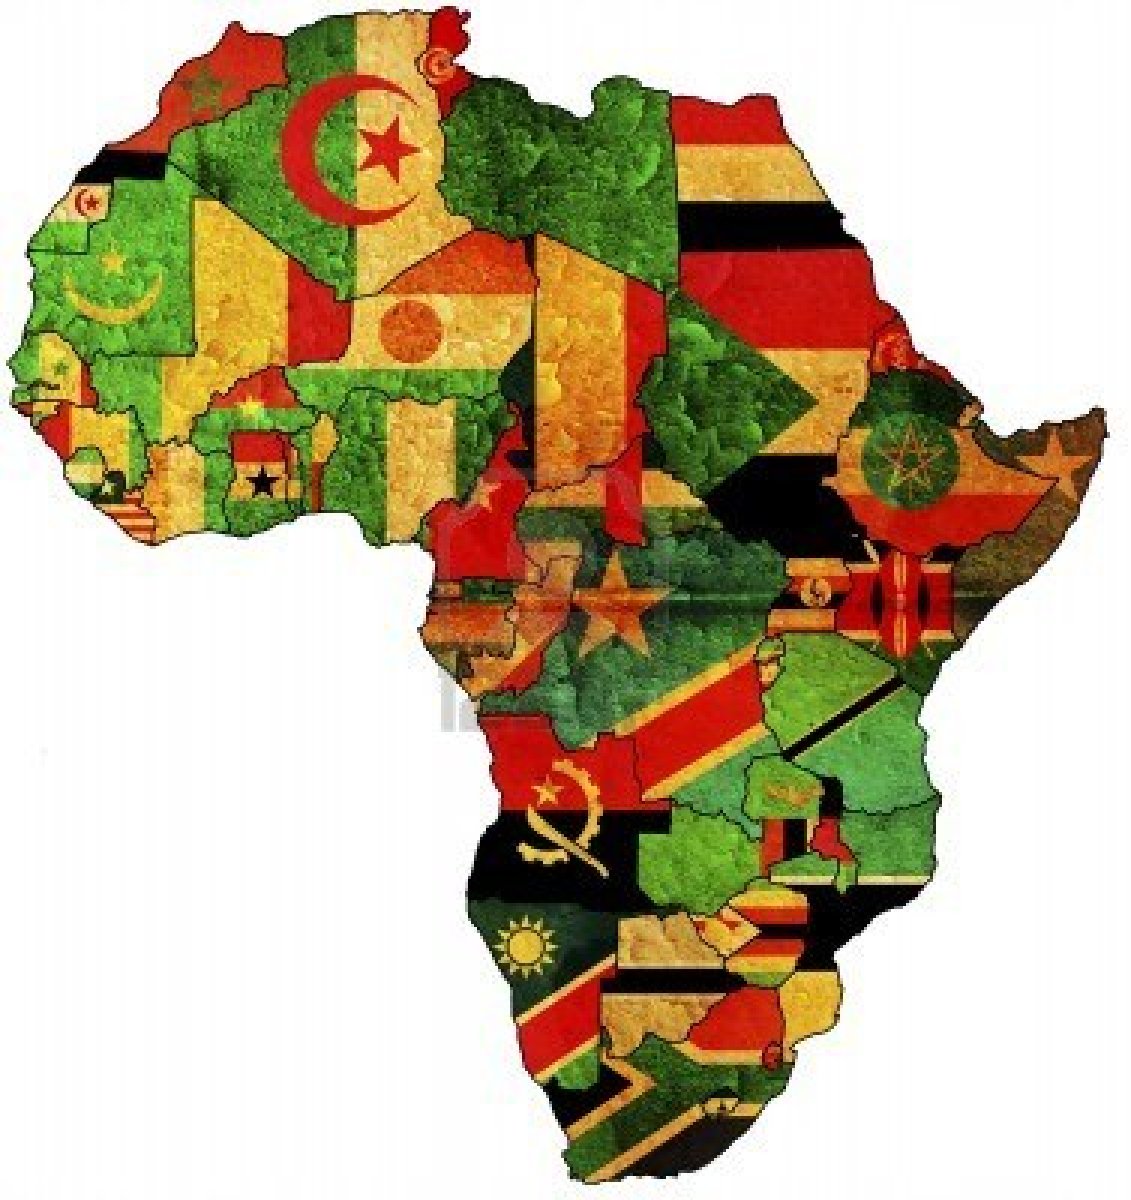 continent africain